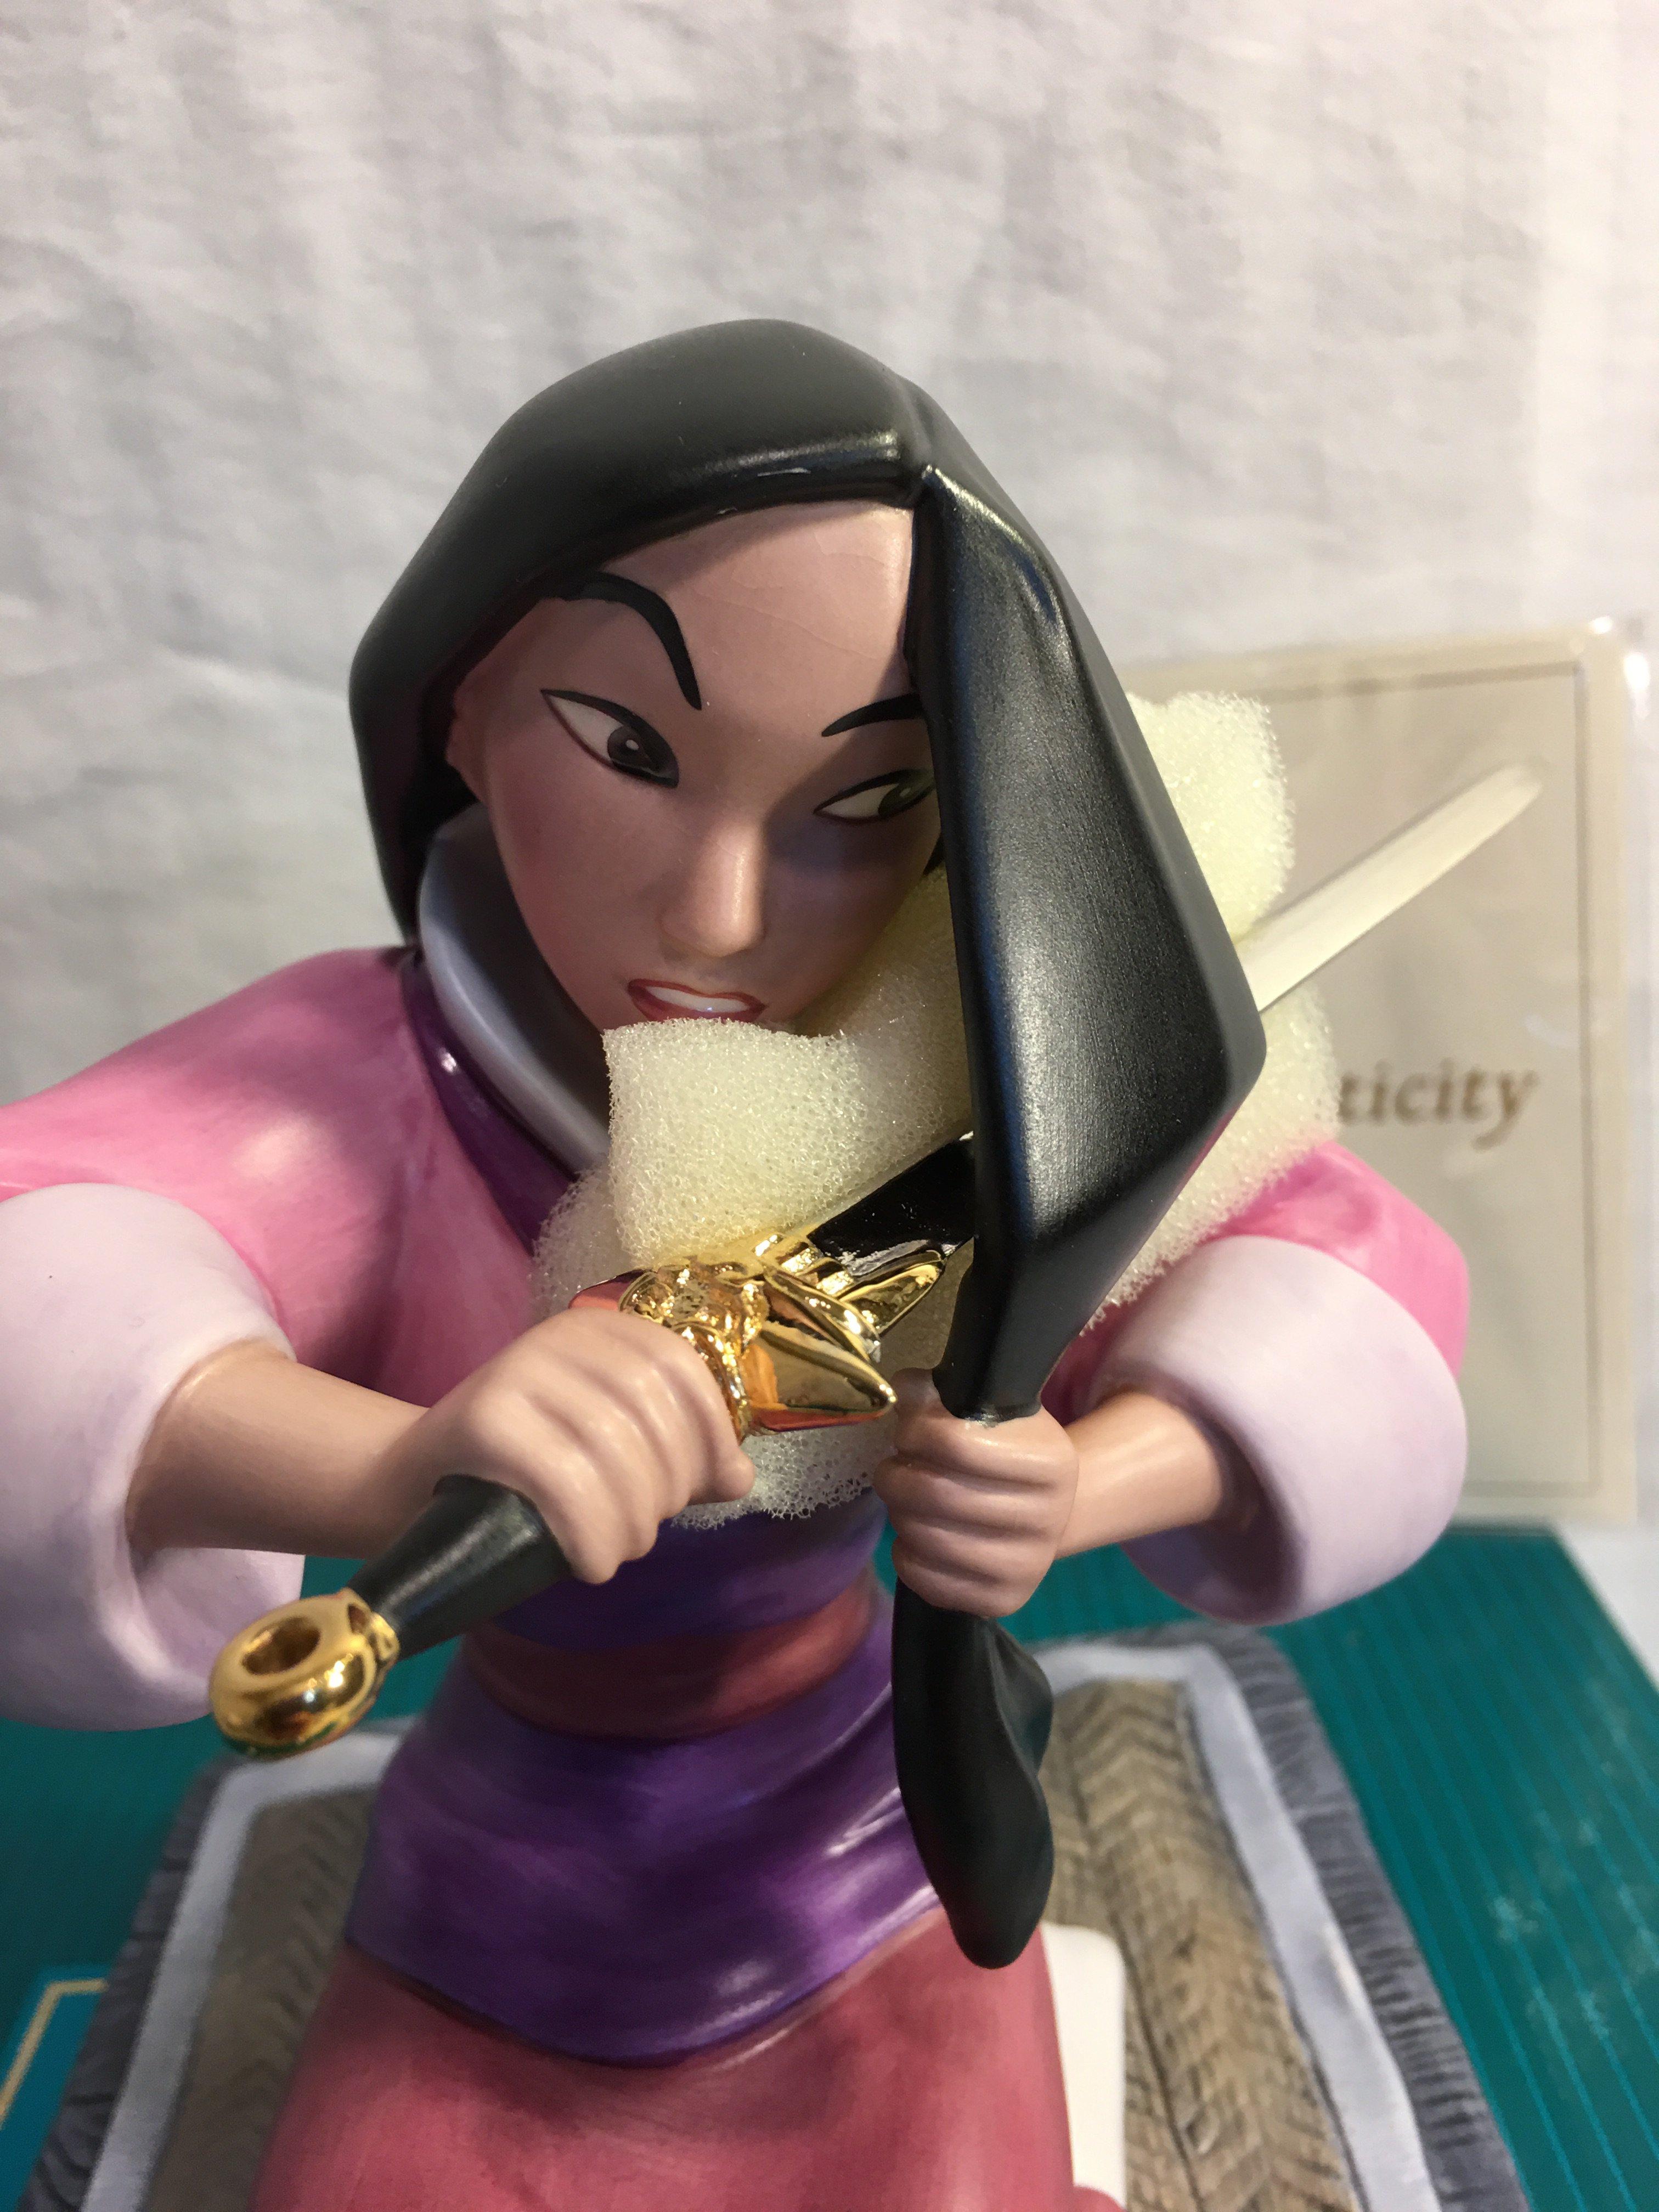 Collector Classics Walt Disney Collection "Honorable Decision Mulan Figurine Box Size:9x9.5"